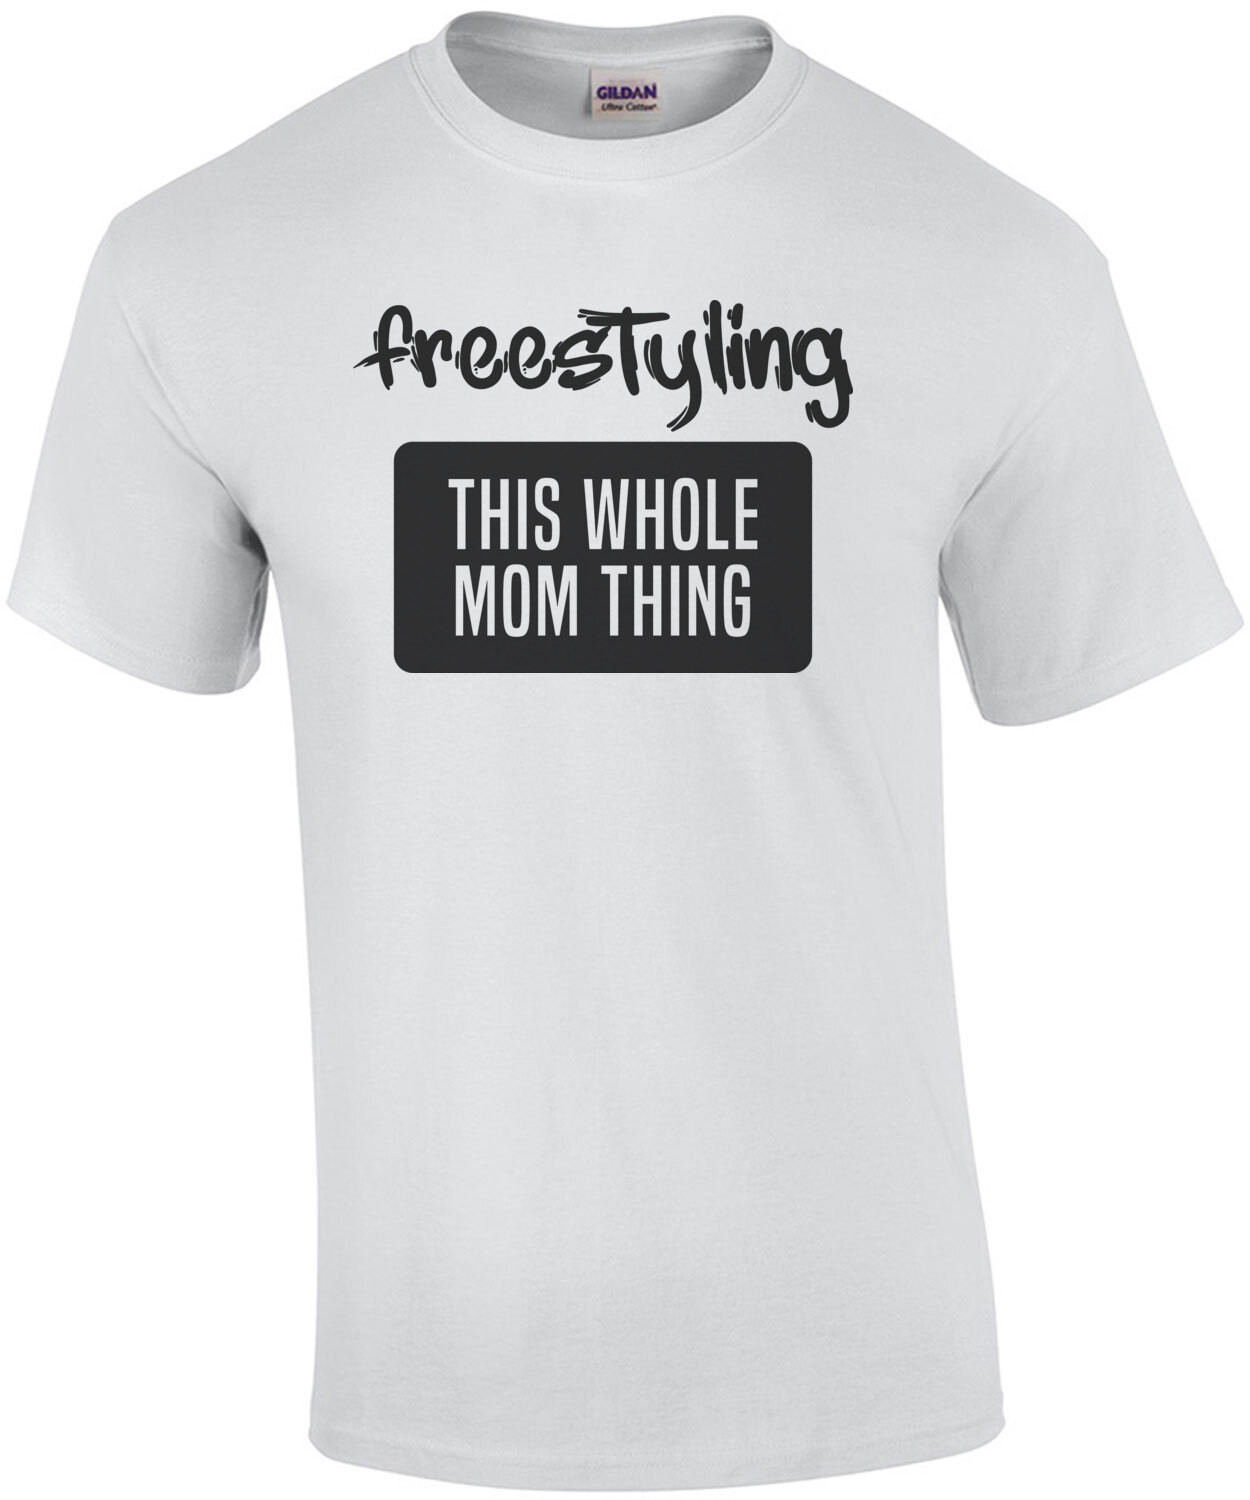 Freestyling this whole mom thing - mom t-shirt